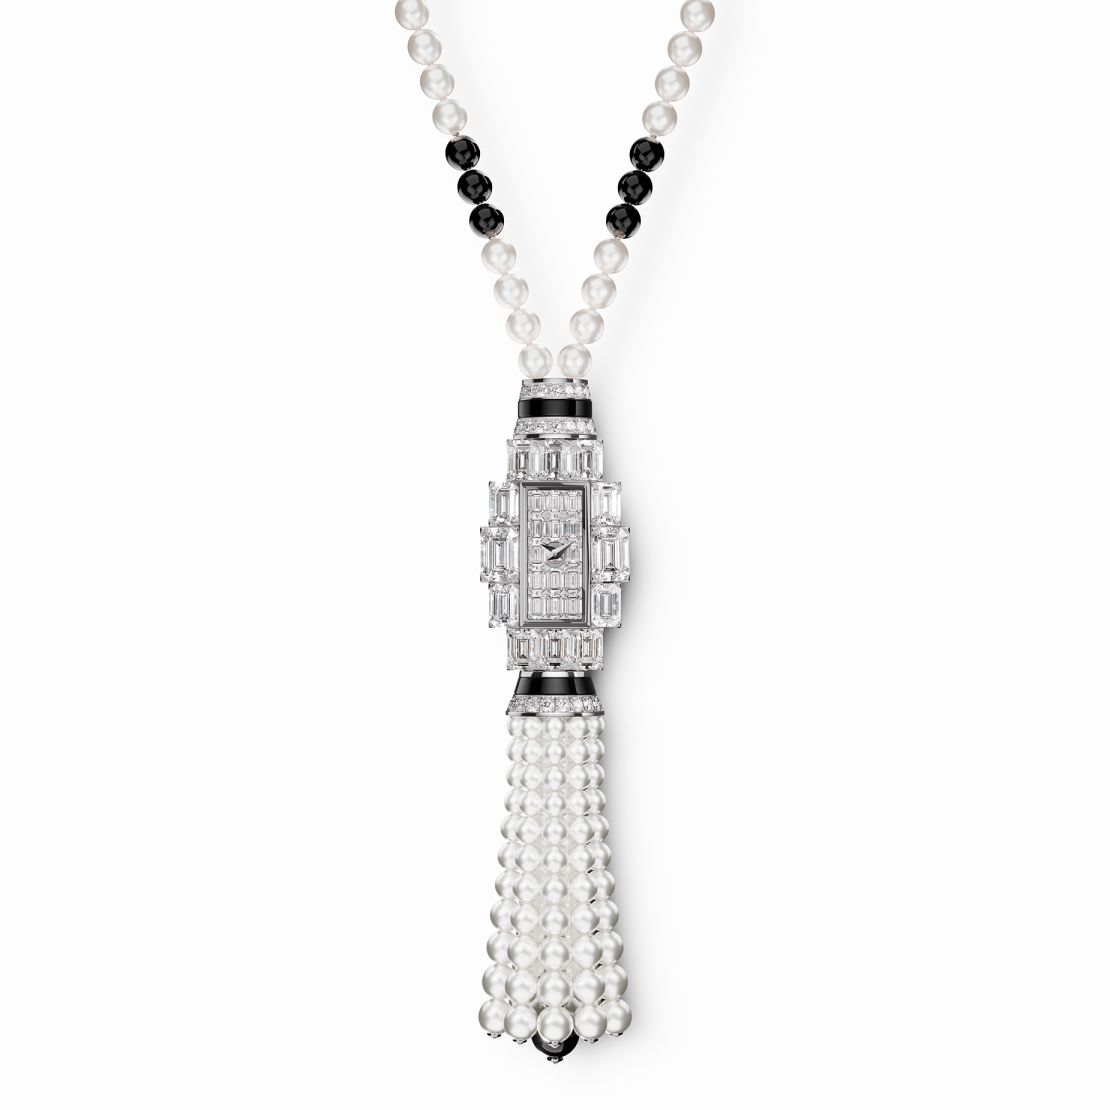 Vacheron Constantin Grand Lady Kalla High Jewelry watch in 18K white gold, emerald-cut diamonds, Akoya pearl beads, onyx beads, POA, <a href="index.php?page=&url=http%3A%2F%2Fwww.vacheron-constantin.com%2F" target="_blank">vacheron-constantin.com</a>. Available now.